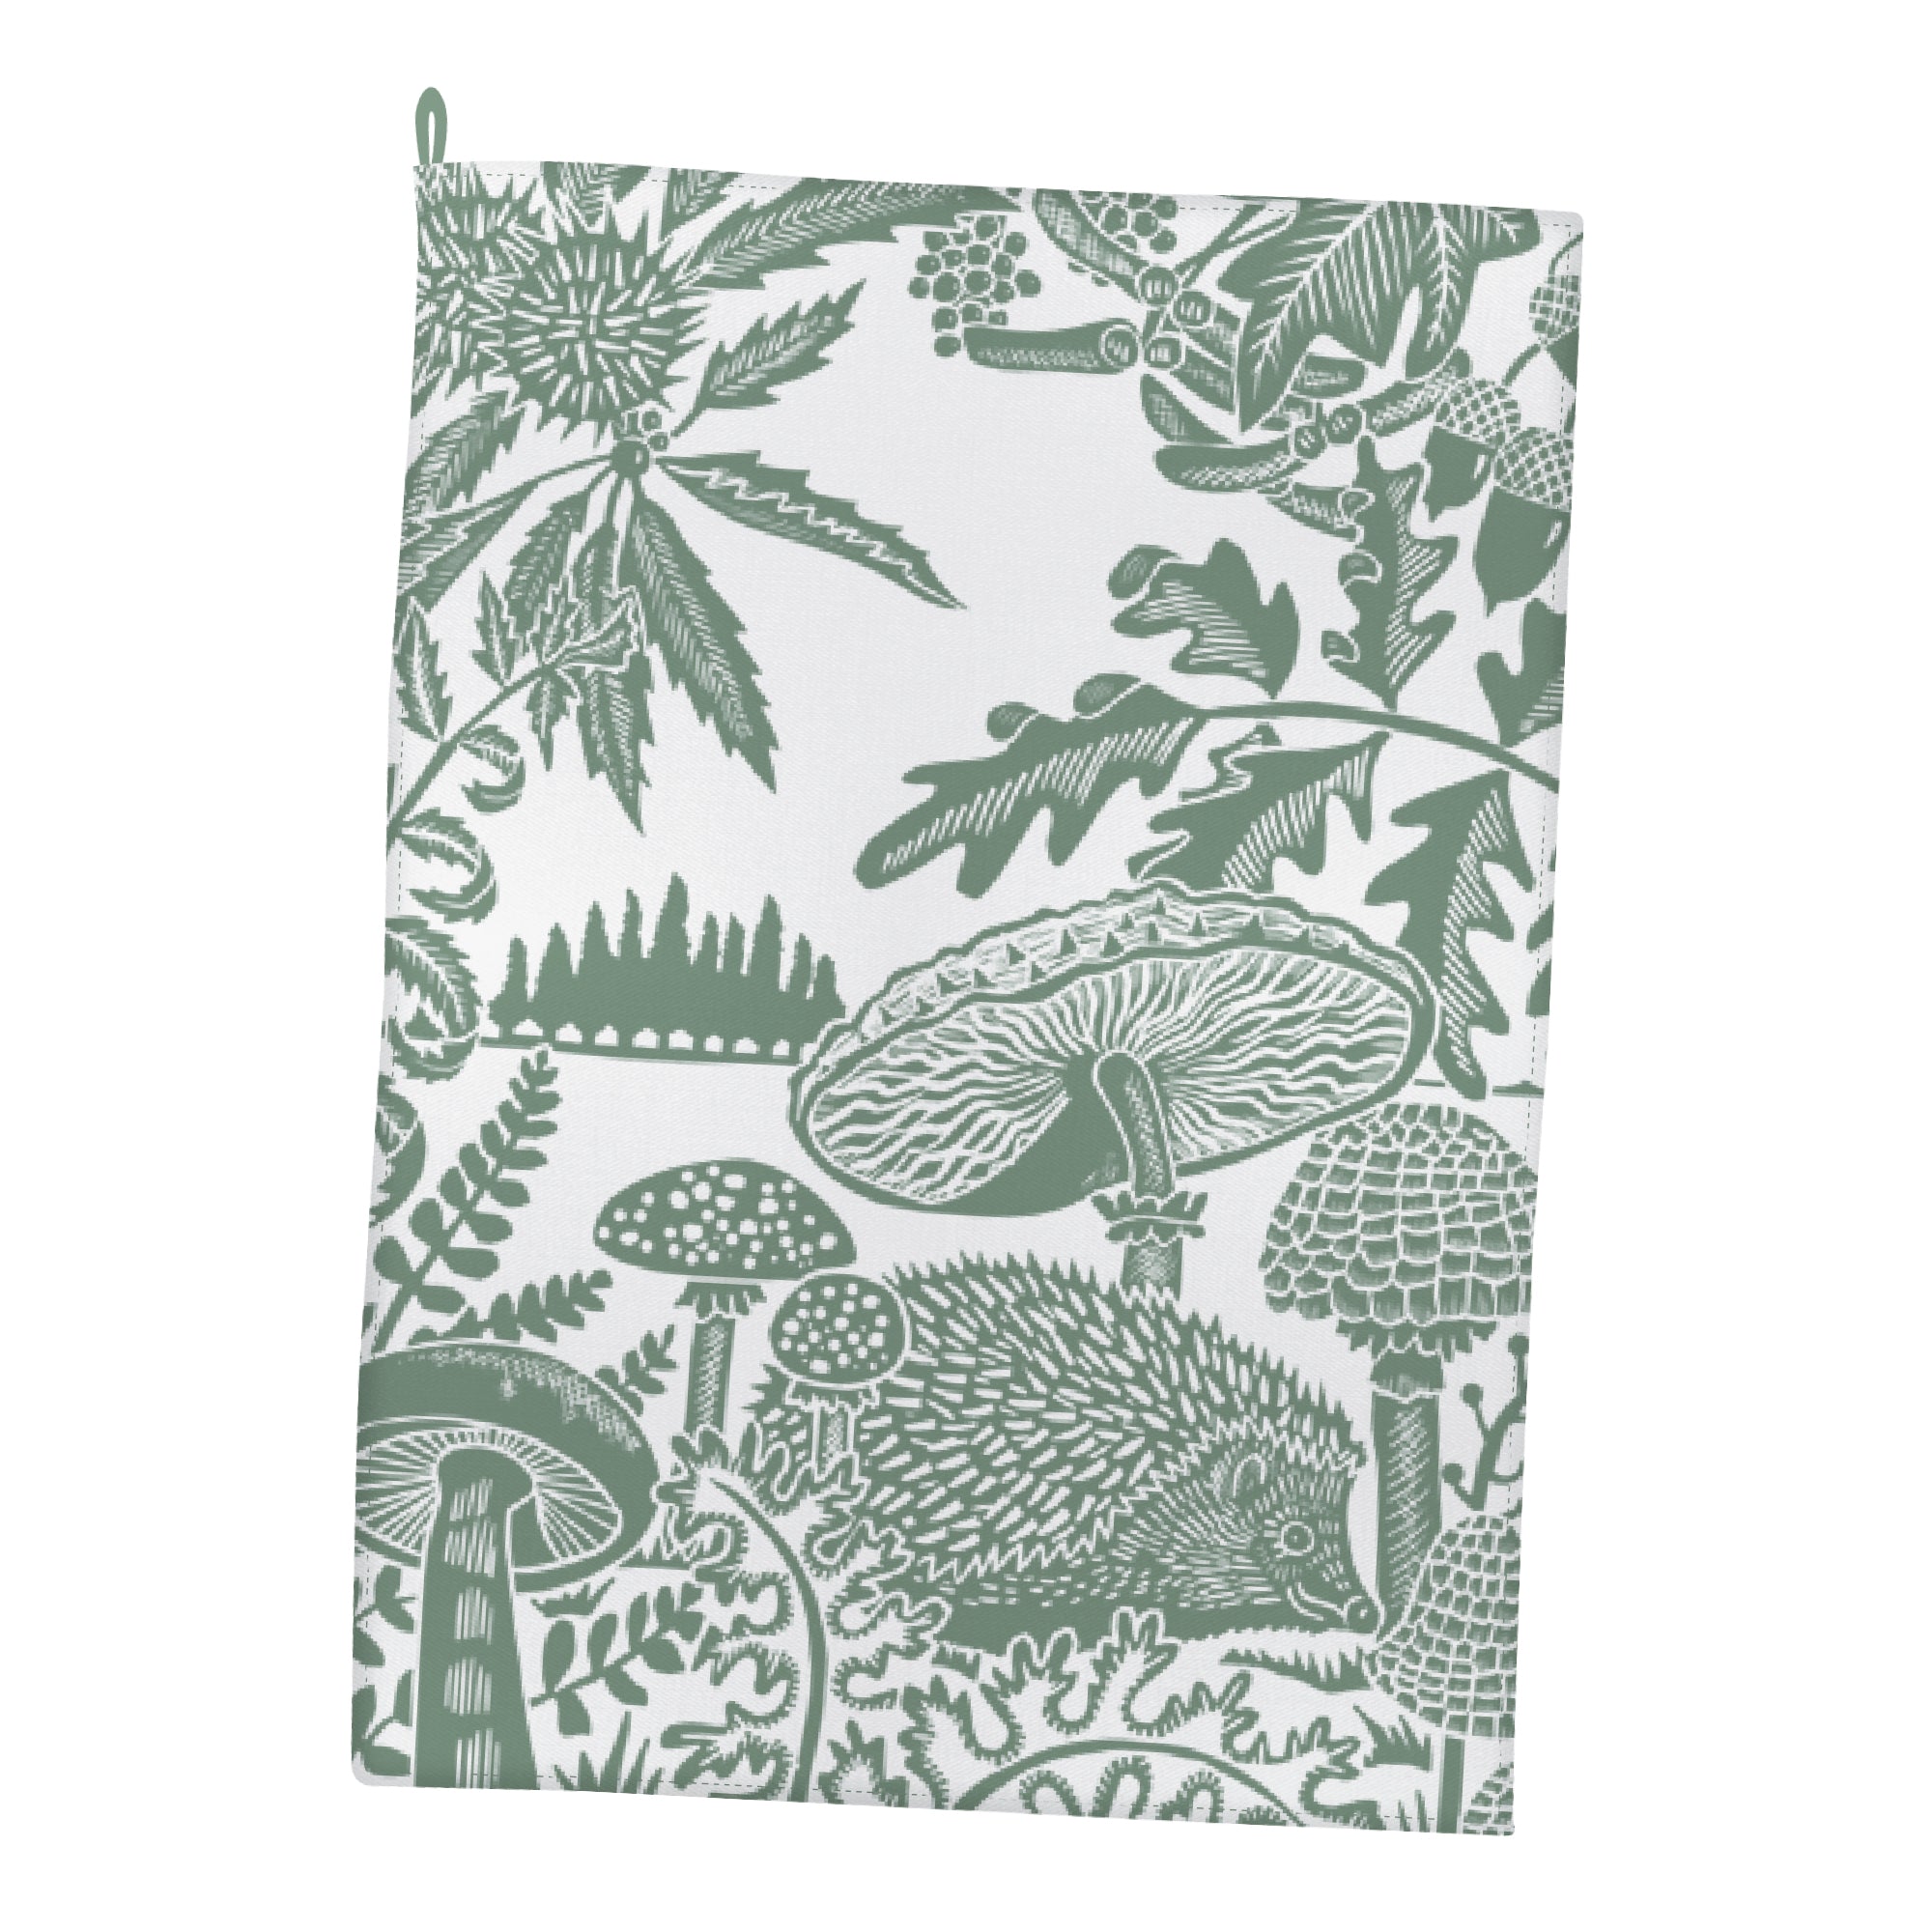 Tea Towel (Recycled Cotton) - Kate Heiss (Woodland Green)